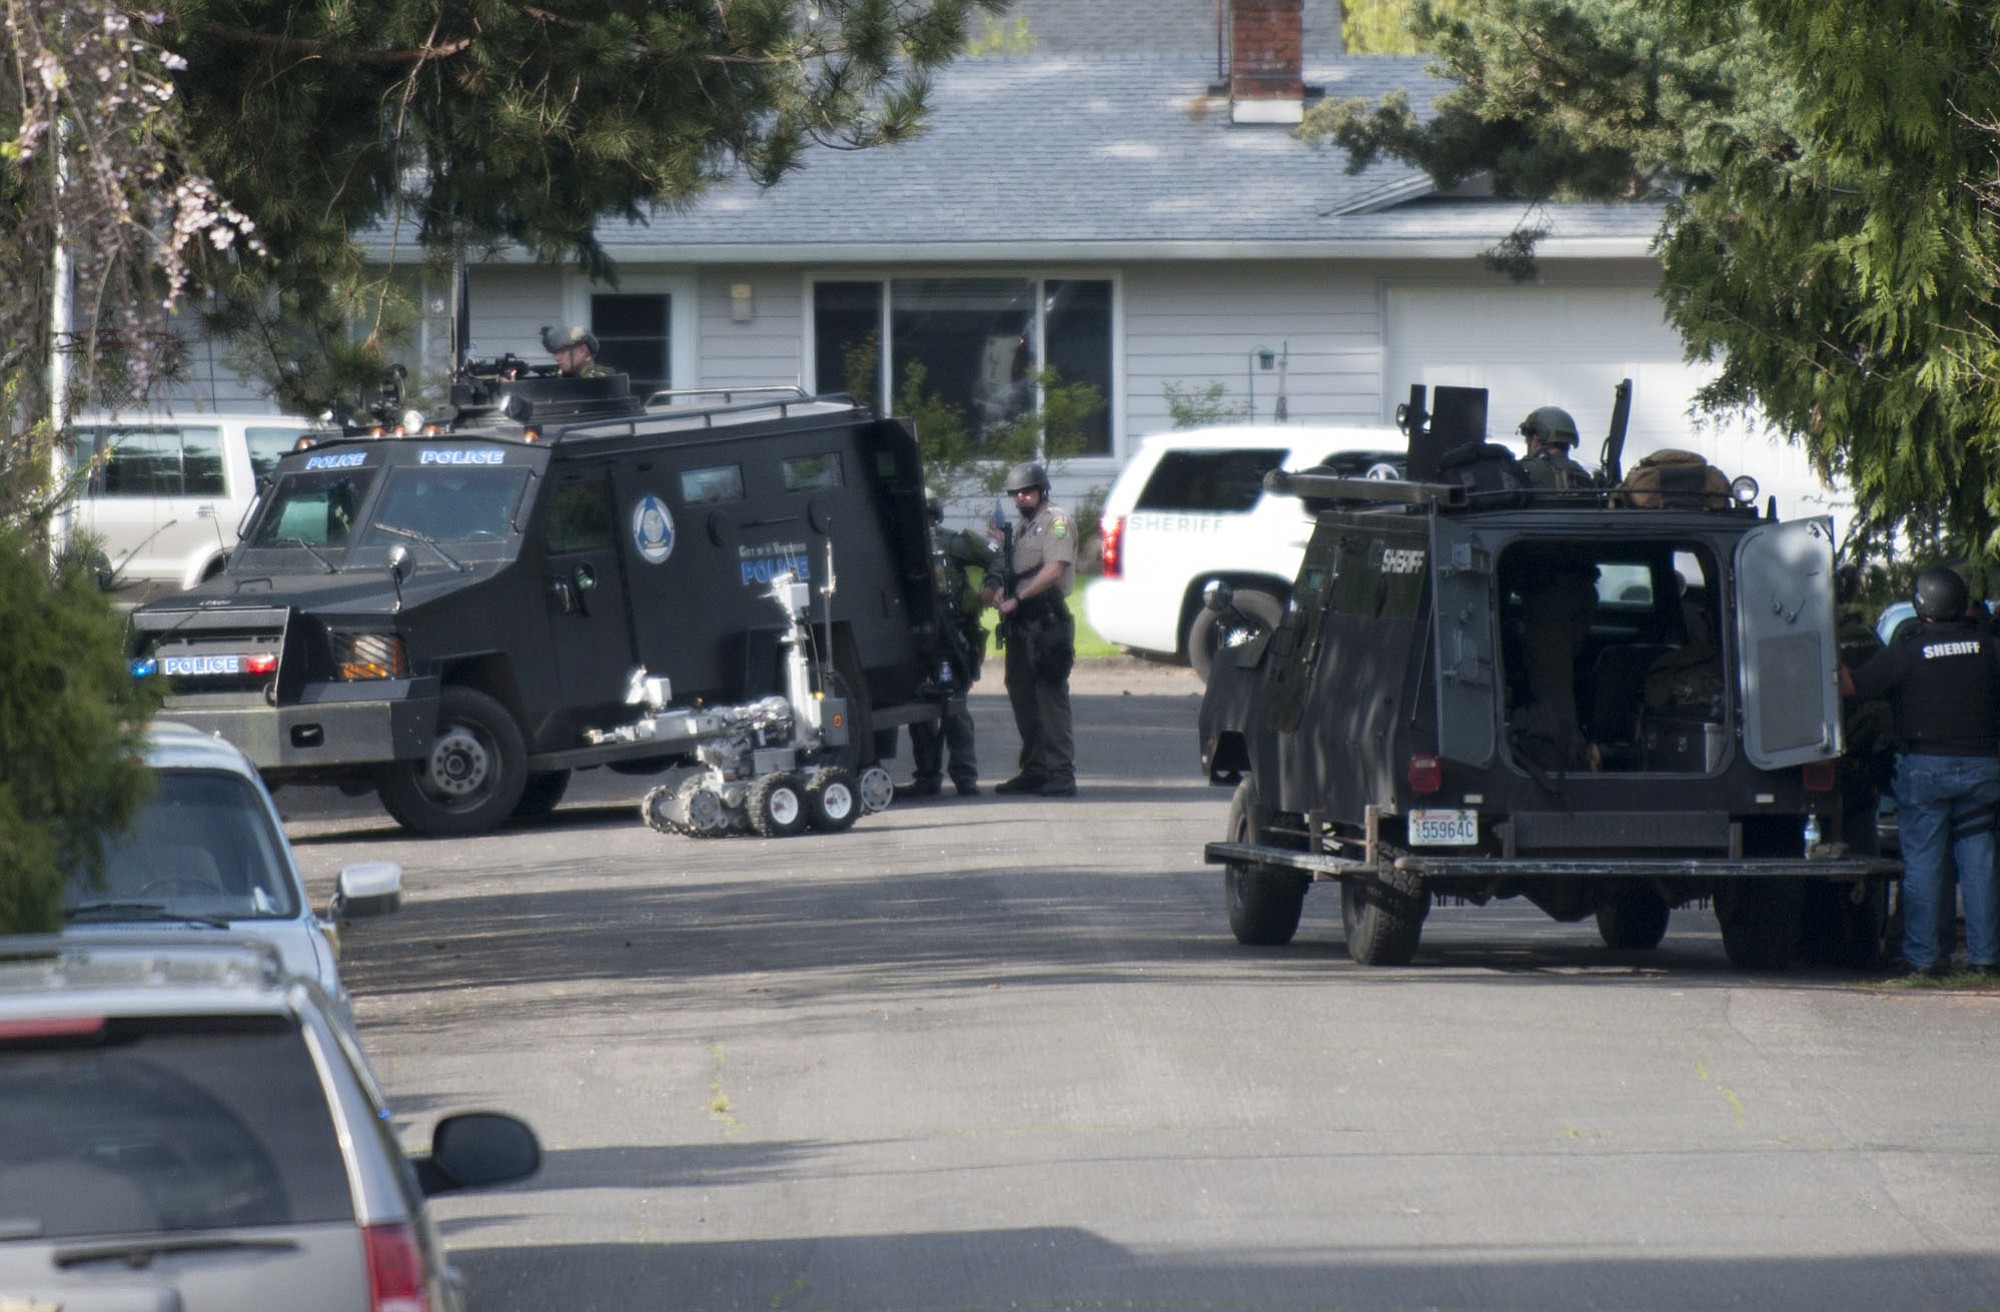 A SWAT team surrounds a home in the Lincoln neighborhood in Vancouver on Friday.